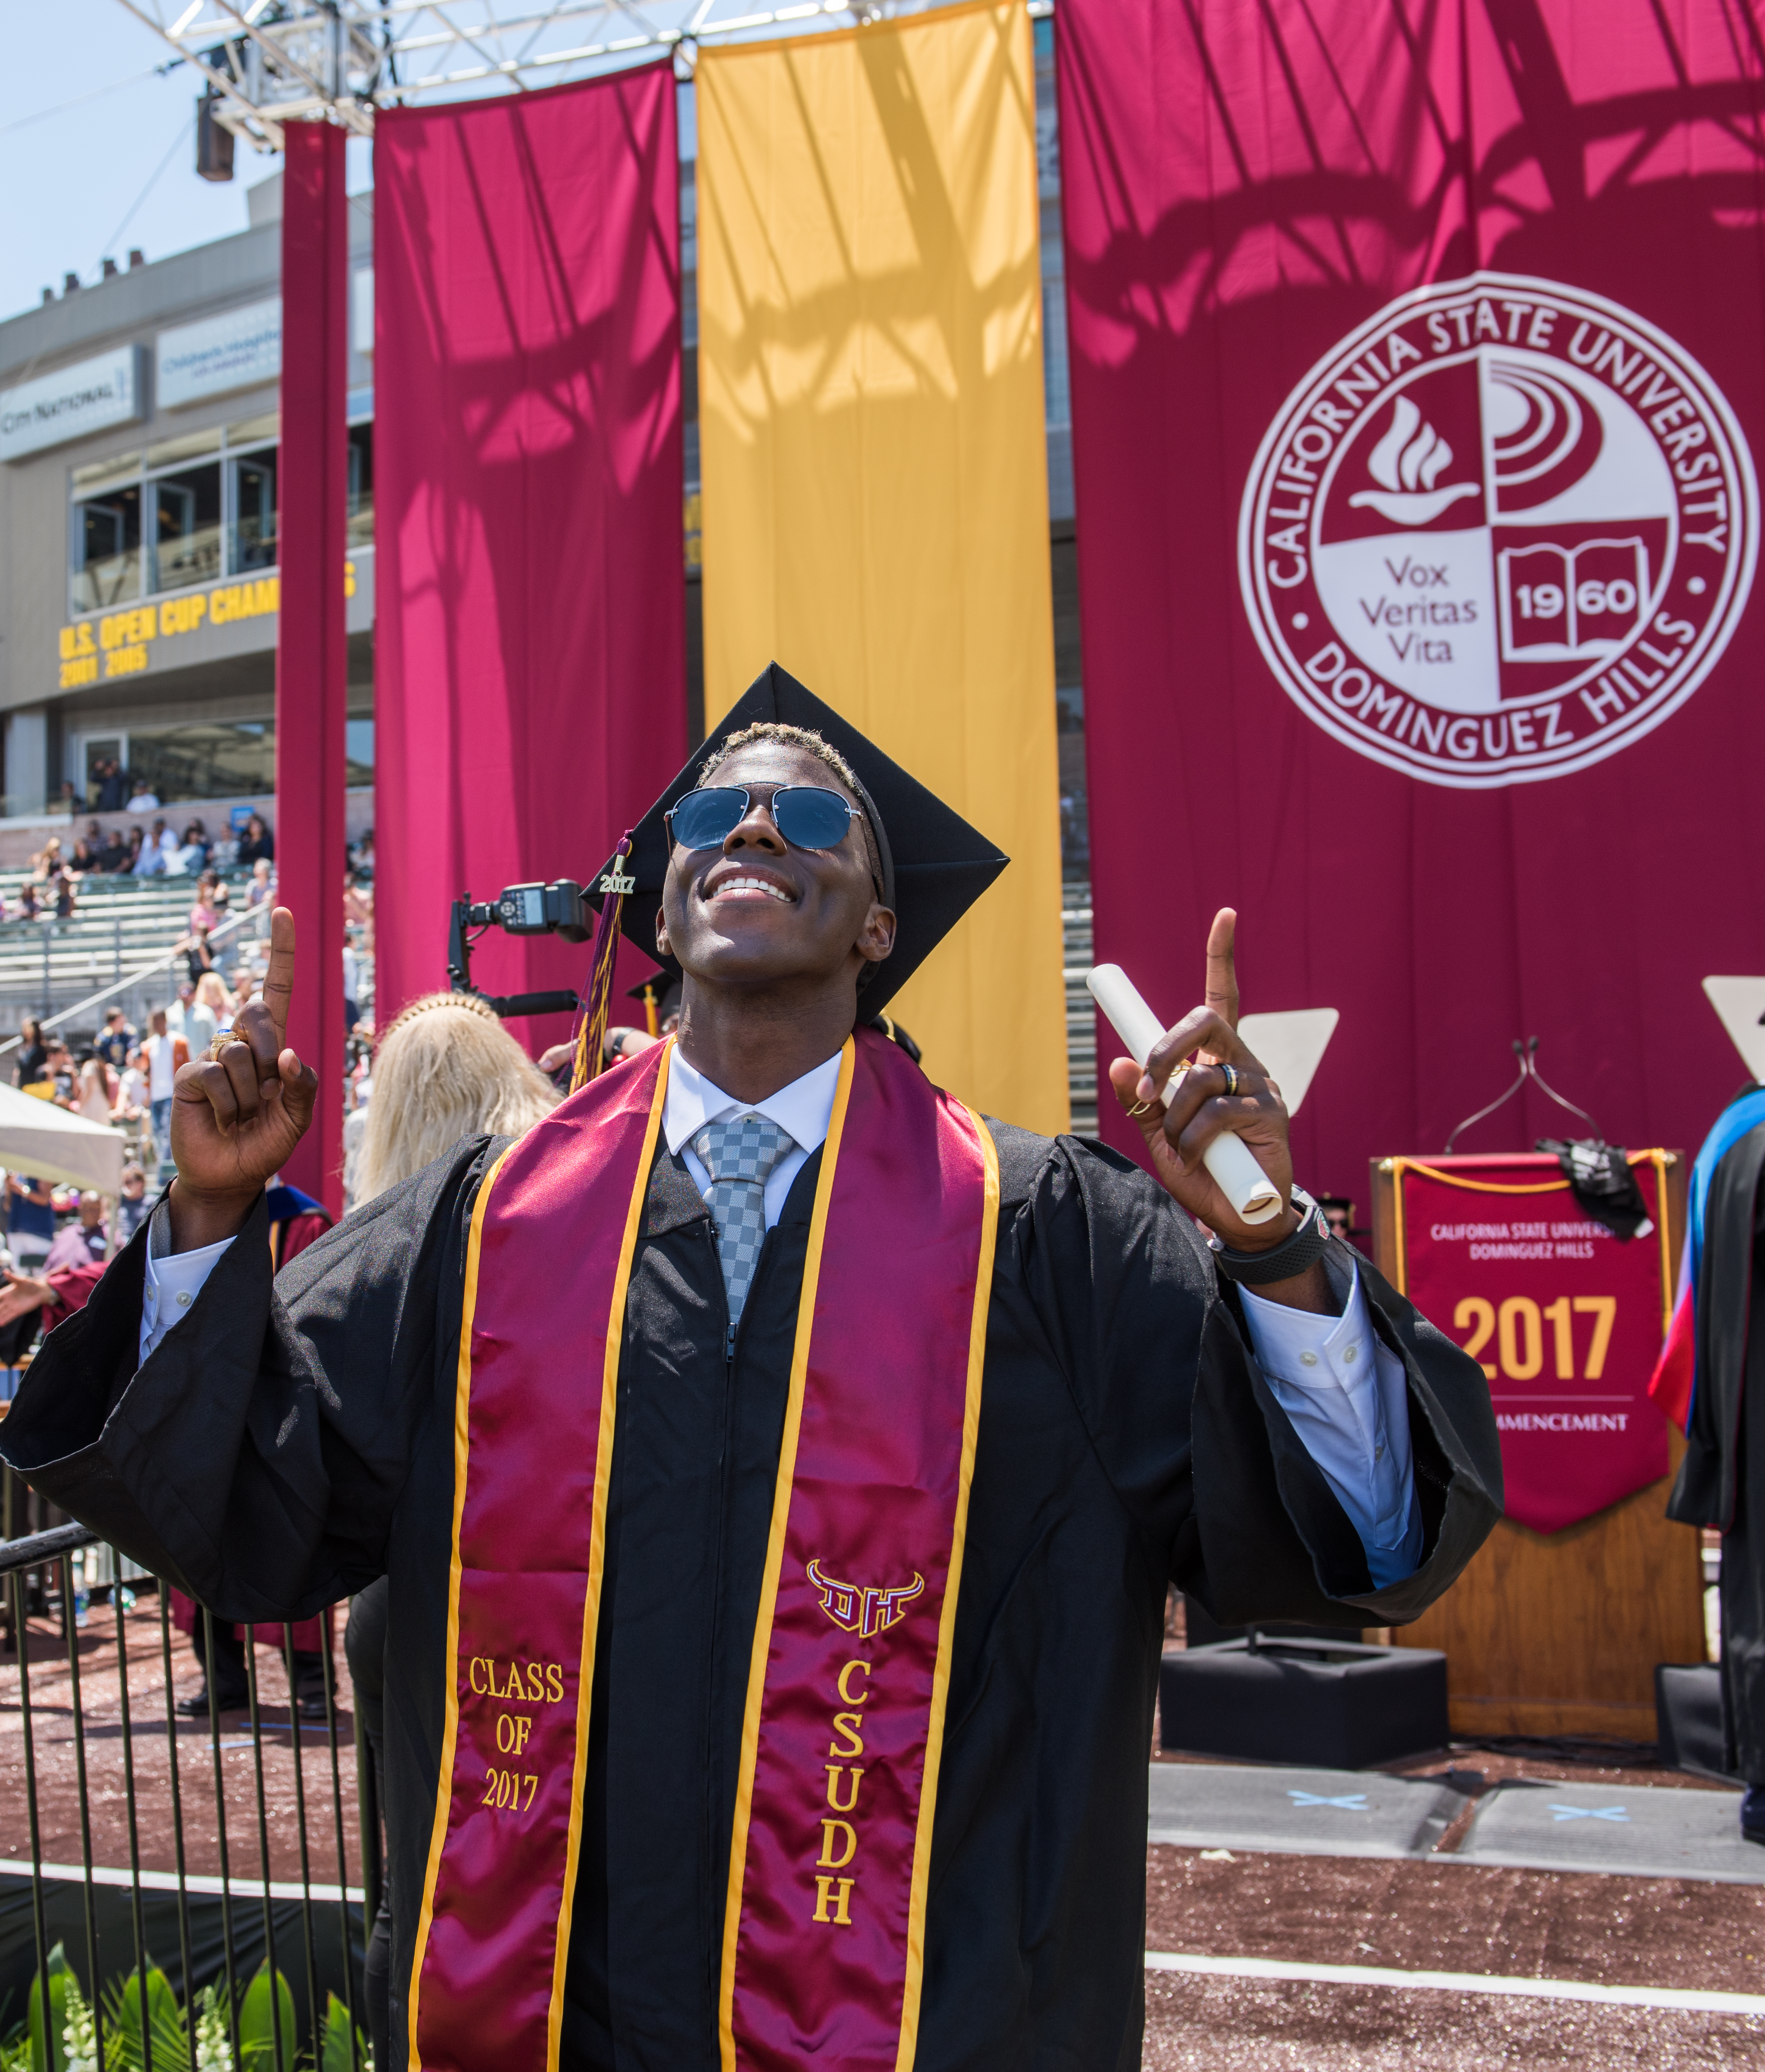 California State University Dominguez Hills 2017 Commencement Ceremony College of Health and Human Services and Nursing, College of Business Administration &amp; Public Policy held in the StubHub stadium on campus at CSUDH on May 19th 2017